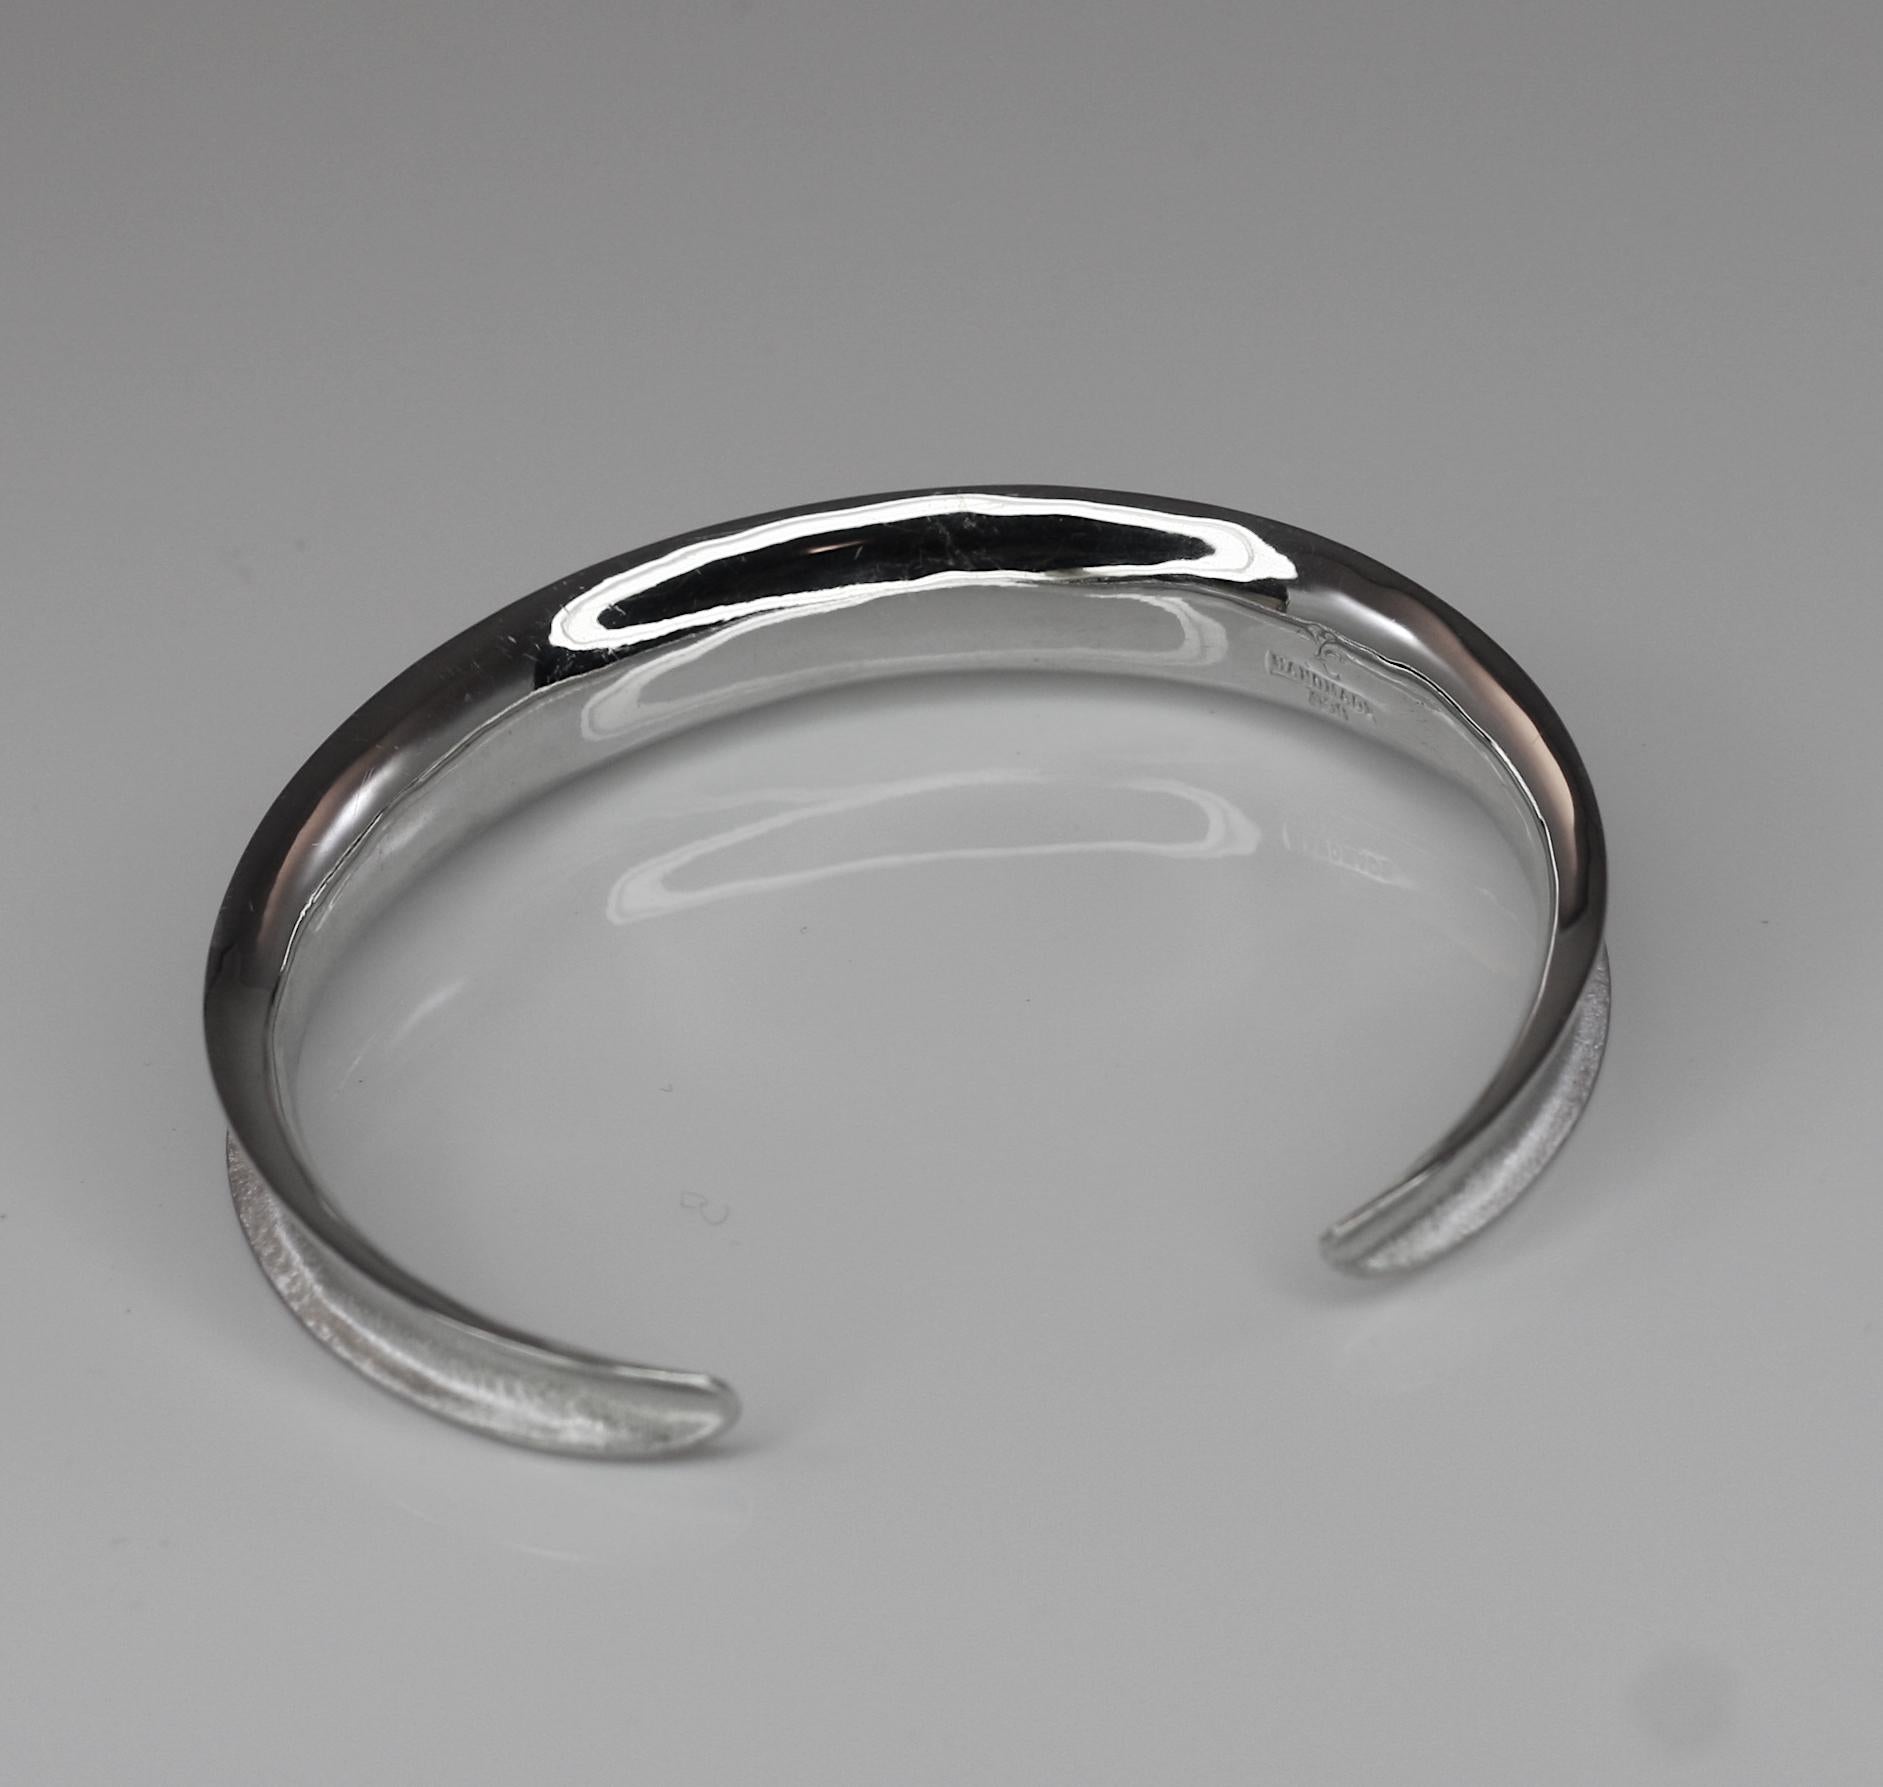 Yianni Creations Fine Silver and Palladium Bangle Bracelet In New Condition For Sale In Astoria, NY